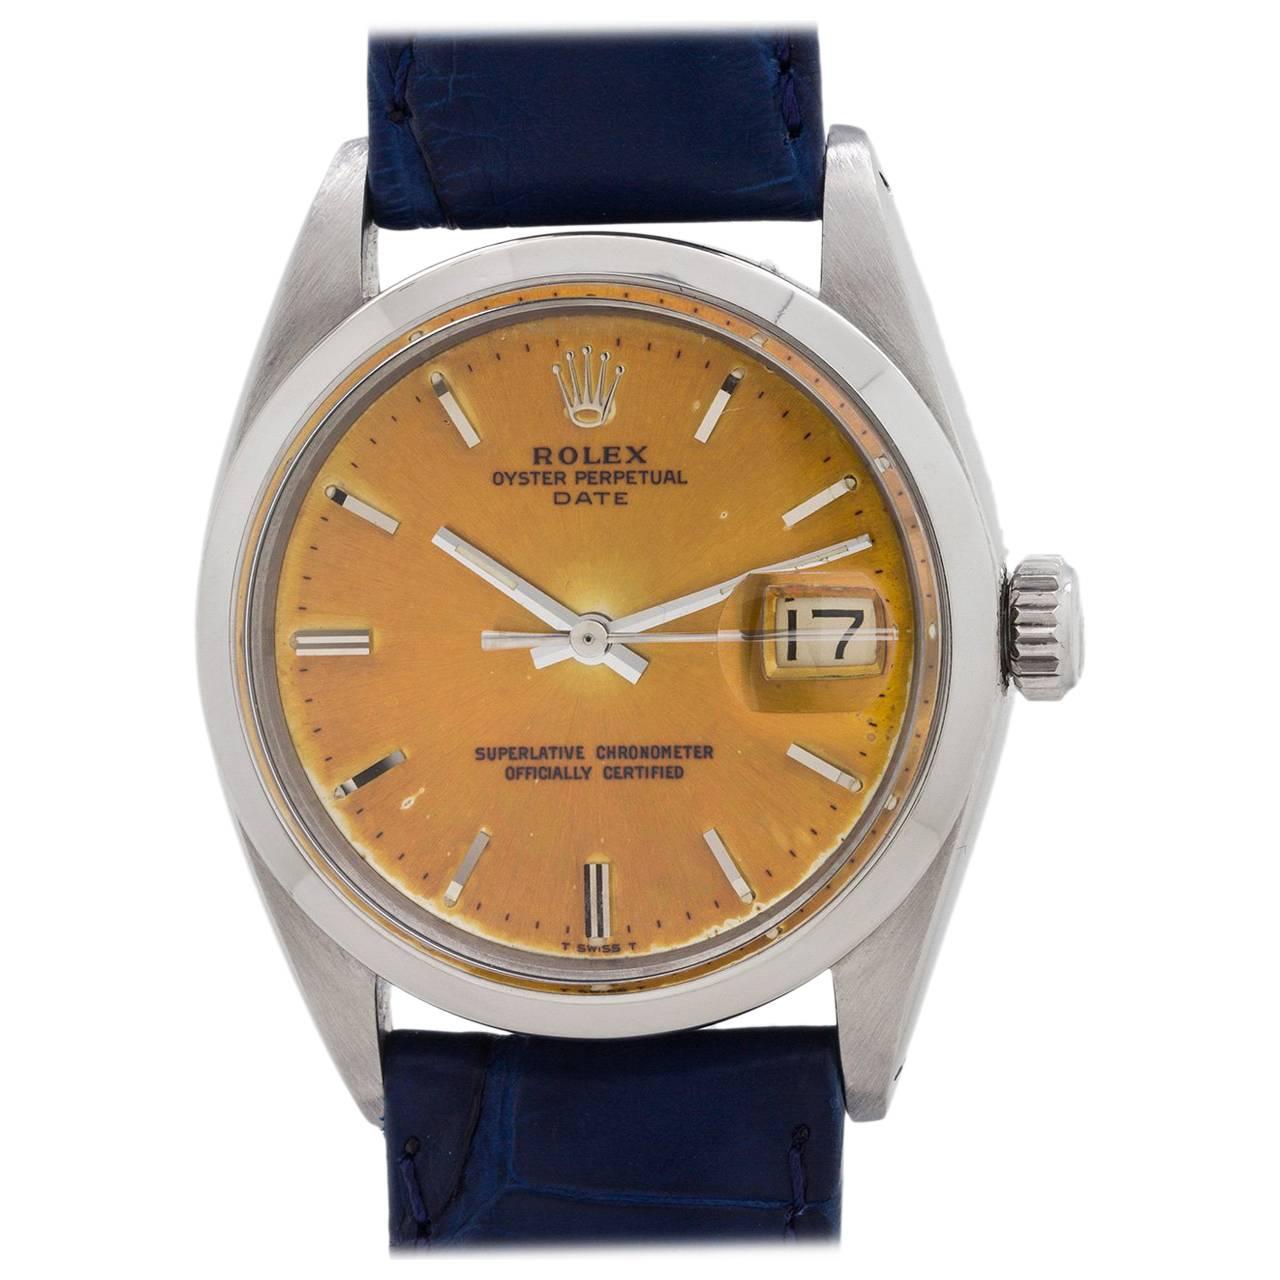 Rolex Stainless Steel Oyster Perpetual Date Wristwatch Model 1500, circa 1965